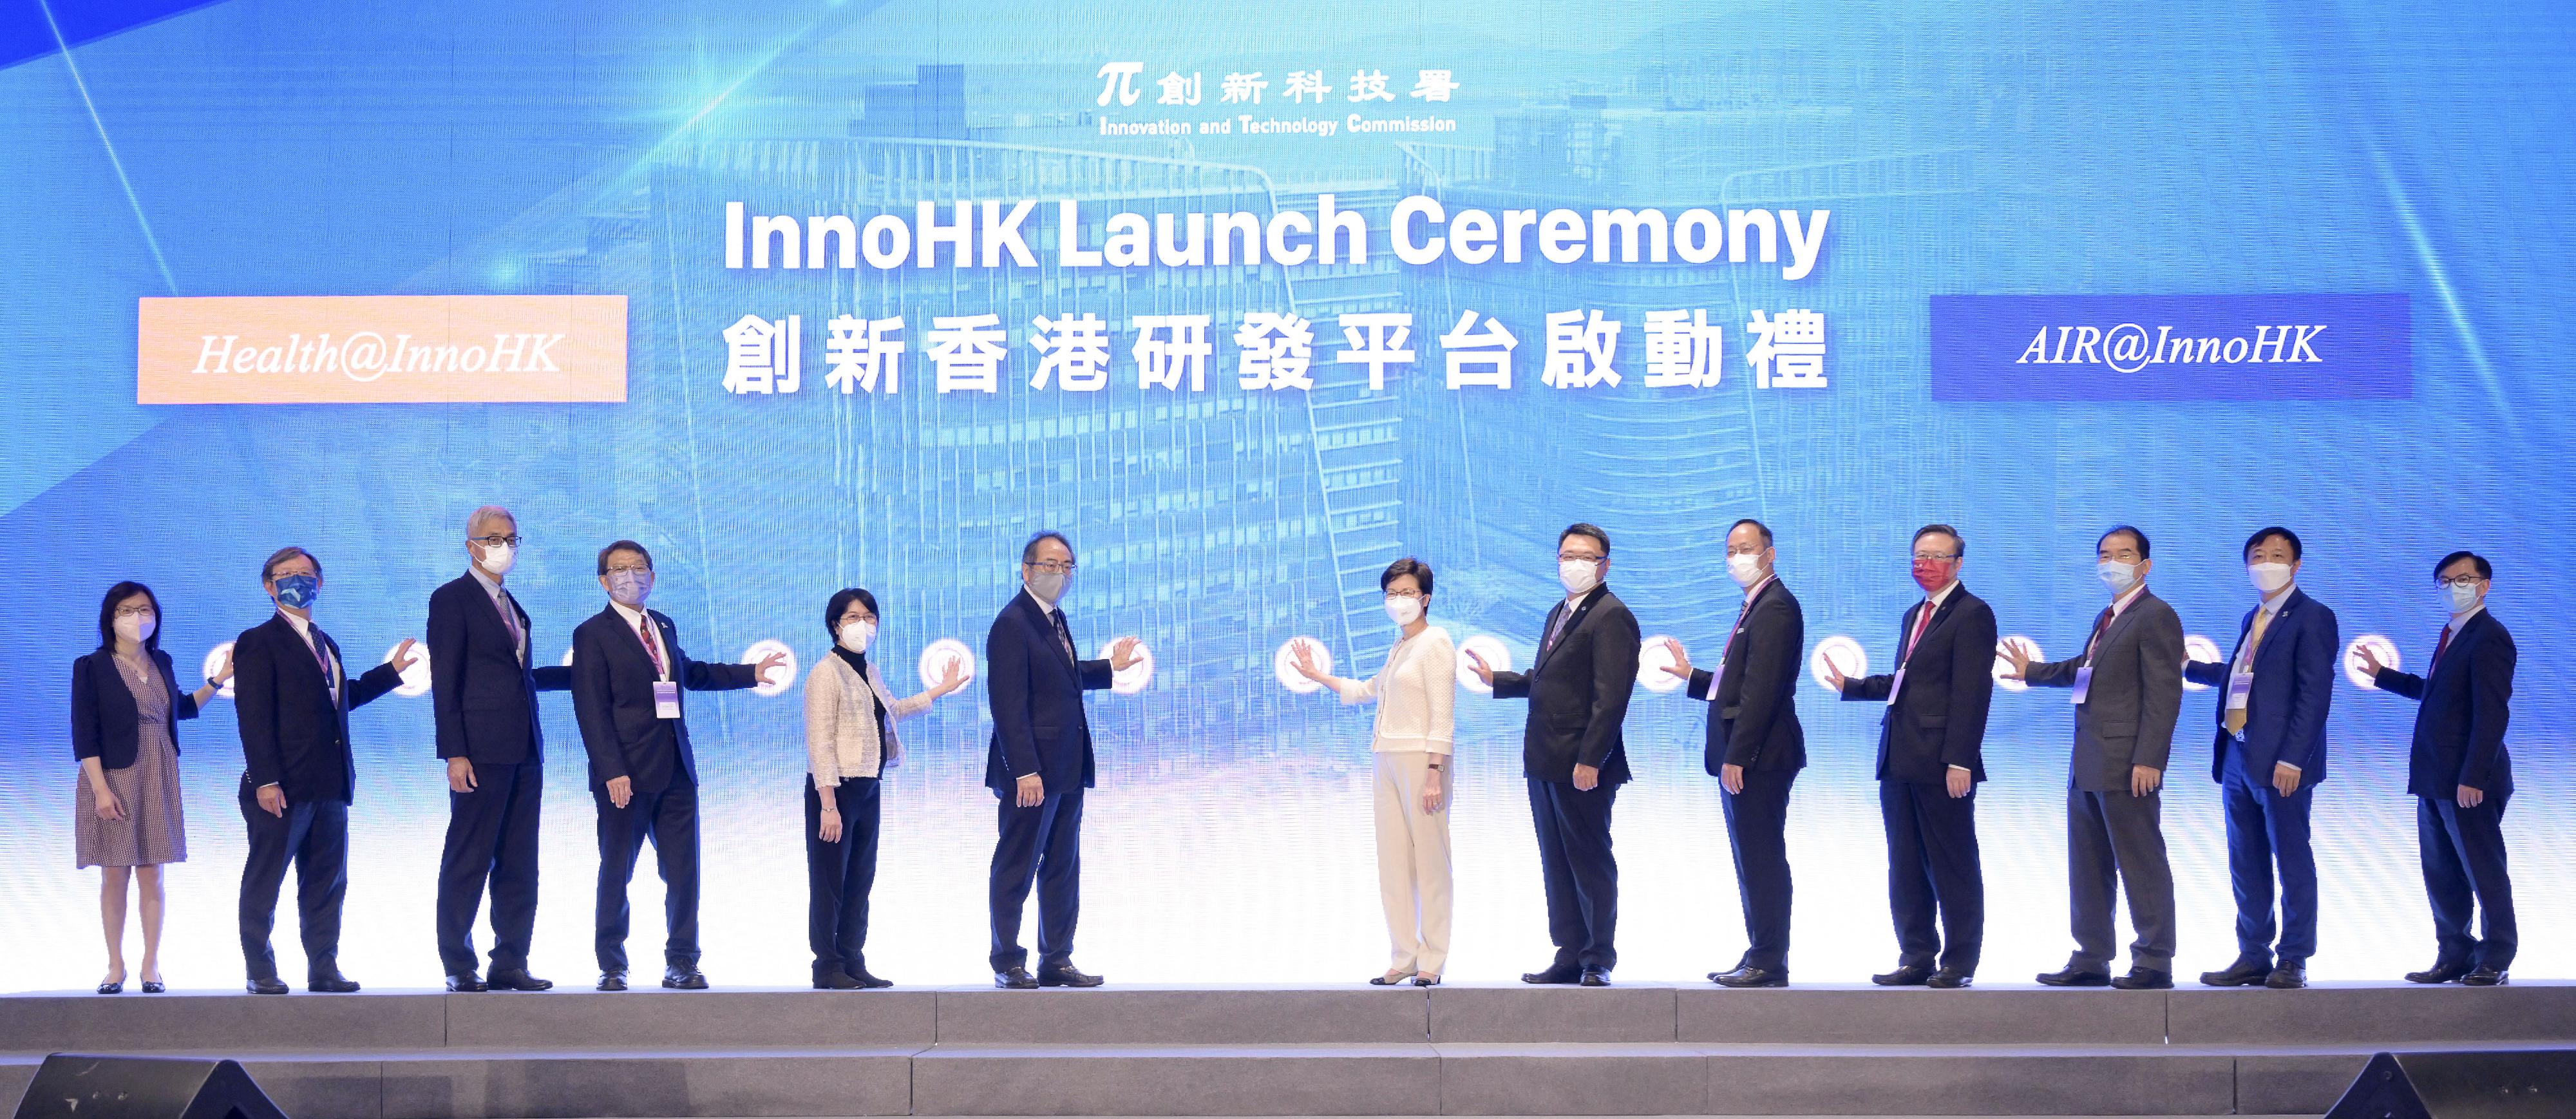 The Chief Executive, Mrs Carrie Lam, attended the InnoHK Launch Ceremony today (May 25). Photo shows (from fifth left) the Permanent Secretary for Innovation and Technology, Ms Annie Choi; the Chairman of the InnoHK Steering Committee, Professor Tsui Lap-chee; Mrs Lam; the Chairman of the Board of Directors of the Hong Kong Science and Technology Parks Corporation, Dr Sunny Chai; and other guests unveiling the official logo of InnoHK.